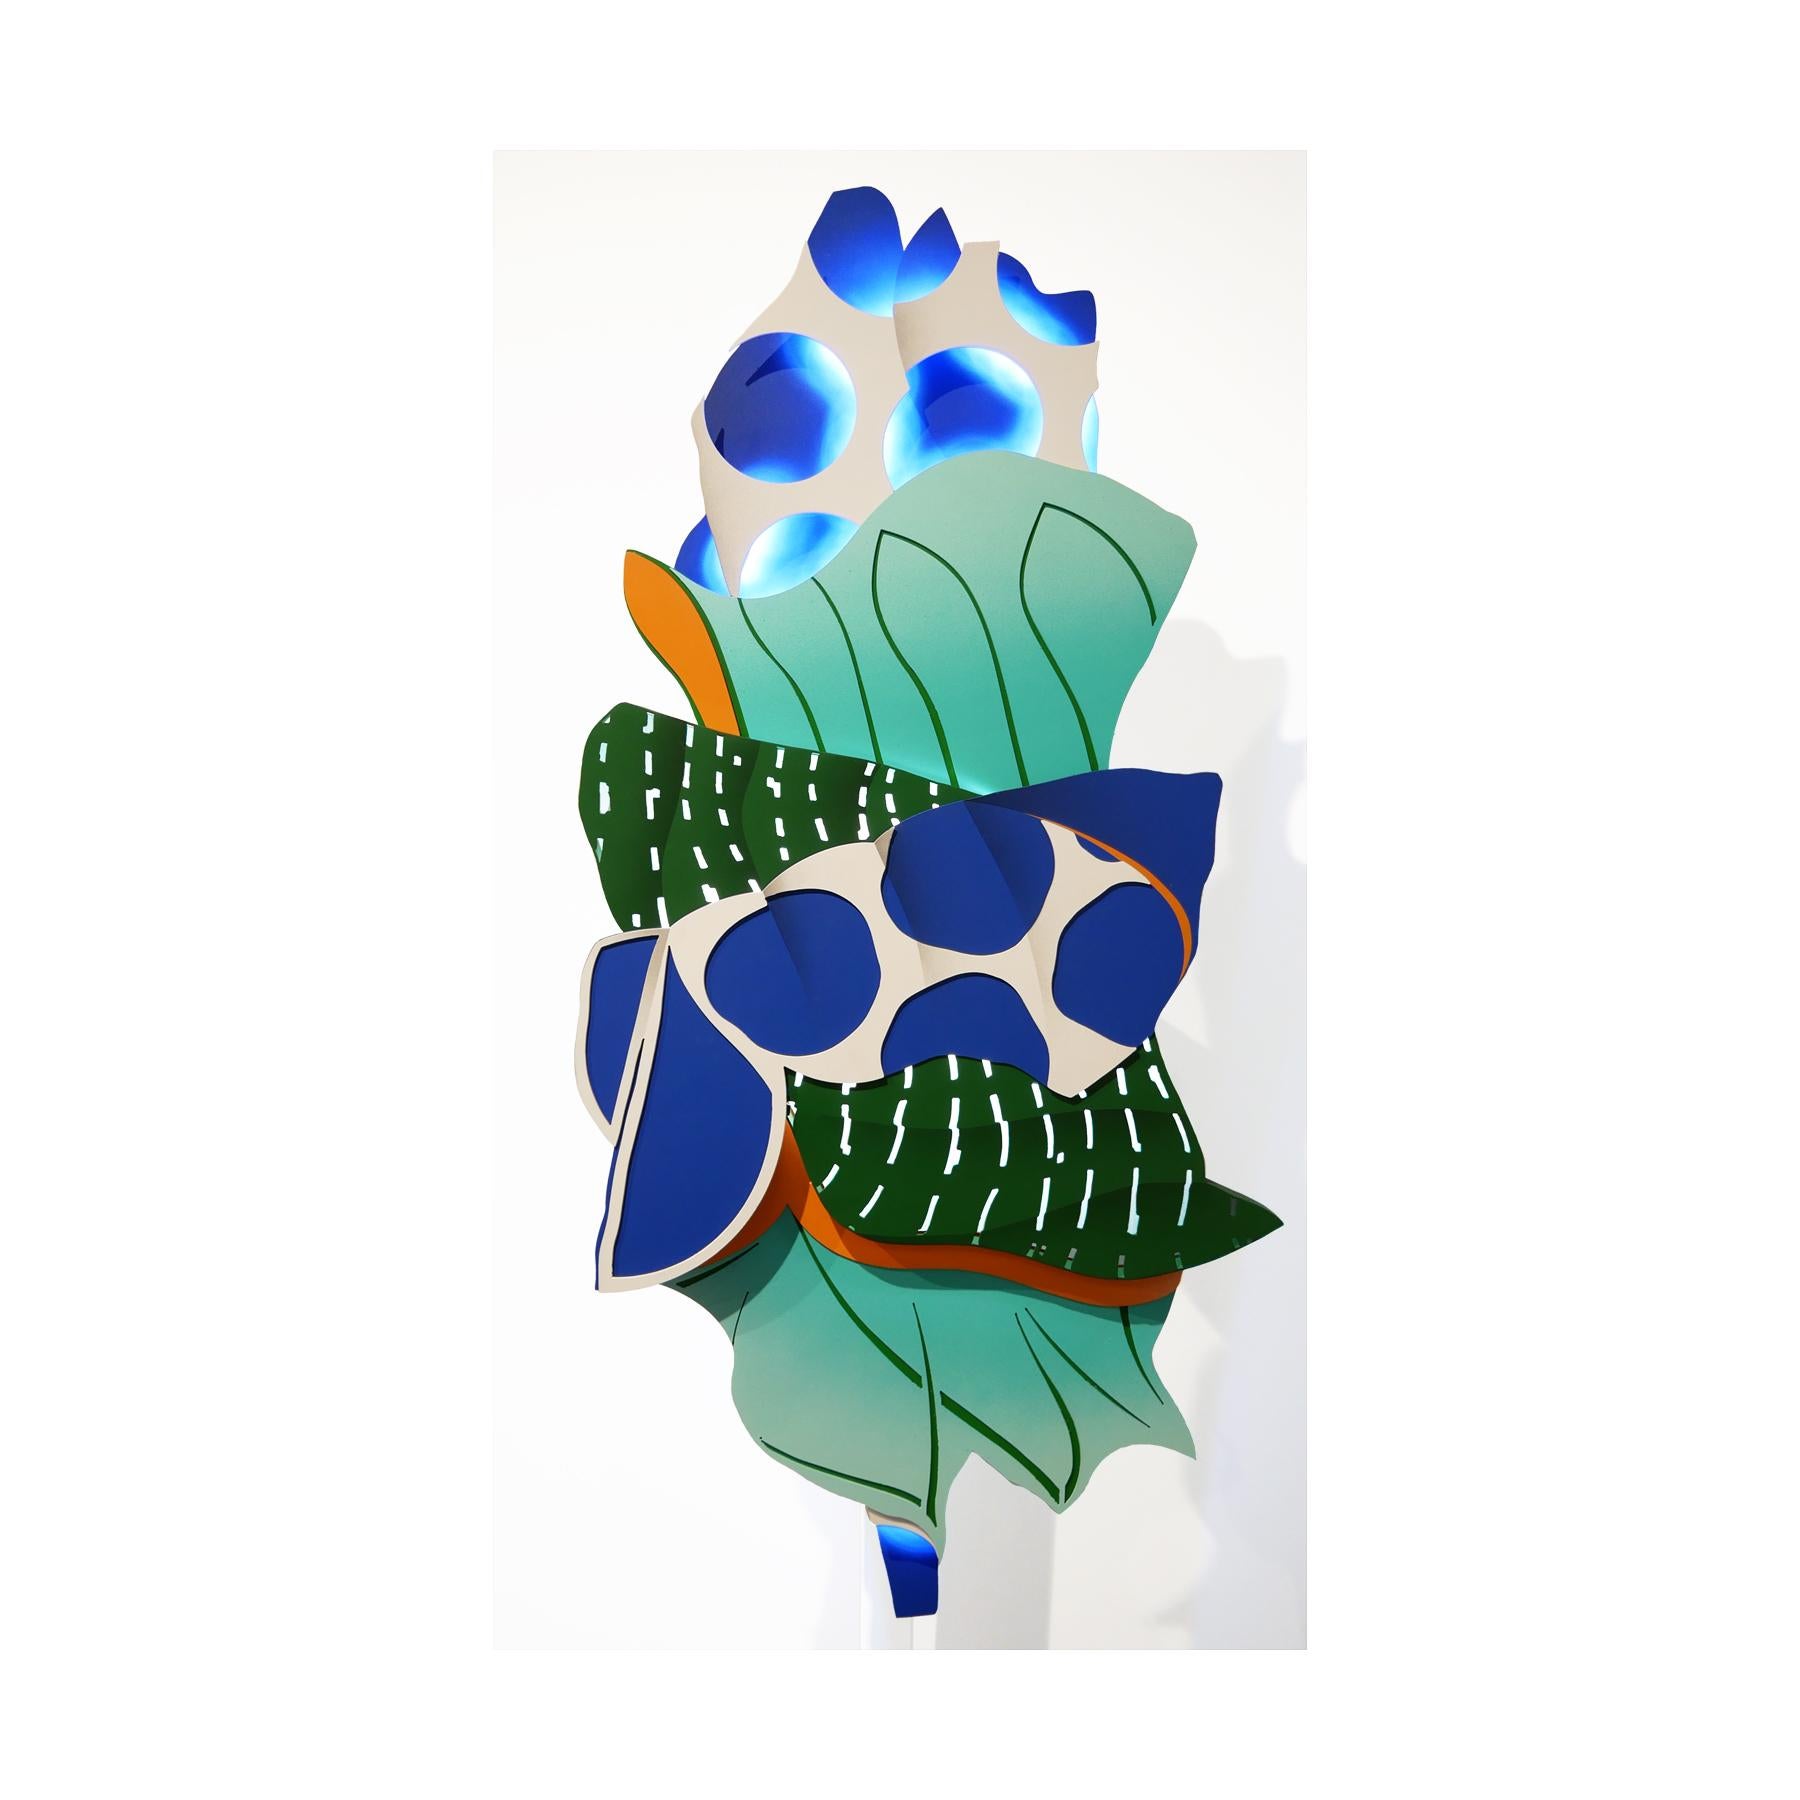 Colorful blue and green toned tropical jungle foliage shaped art lamp by Texas based artists DUAL and Adolfo Esquivel. The work features layers of painted cut steel backlit with a plugin light. Through a blending of an urban subculture aesthetic